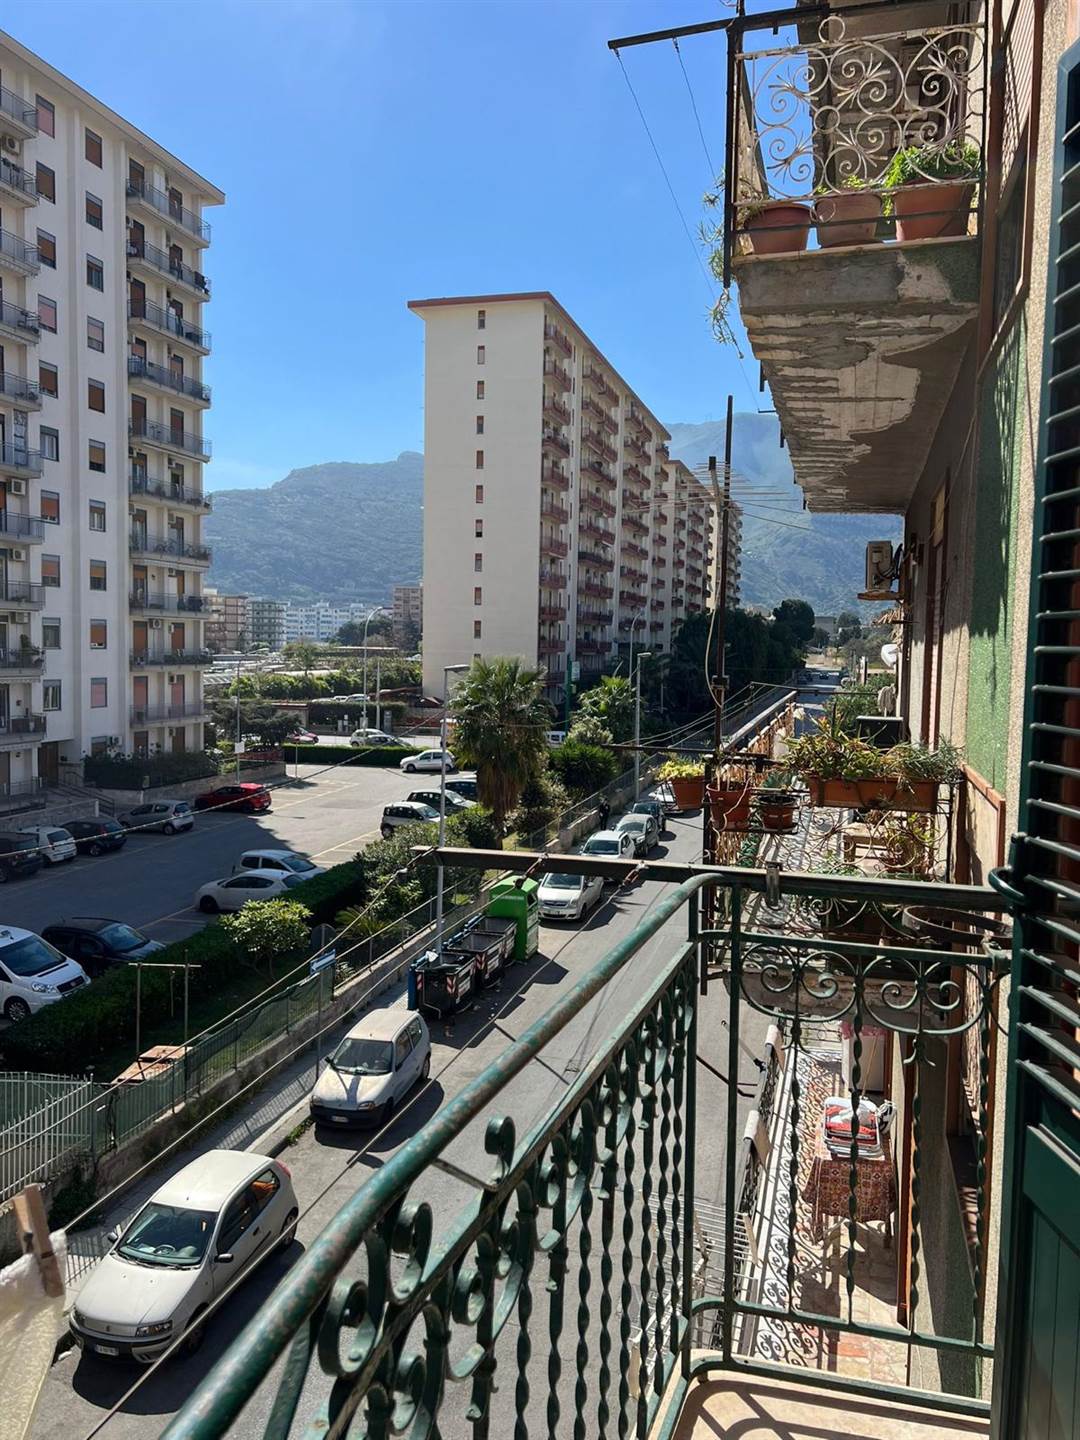 ORETO NUOVA - ORSA MINORE, PALERMO, Apartment for sale of 86 Sq. mt., Habitable, Heating Non-existent, Energetic class: G, Epi: 179 kwh/m2 year, 